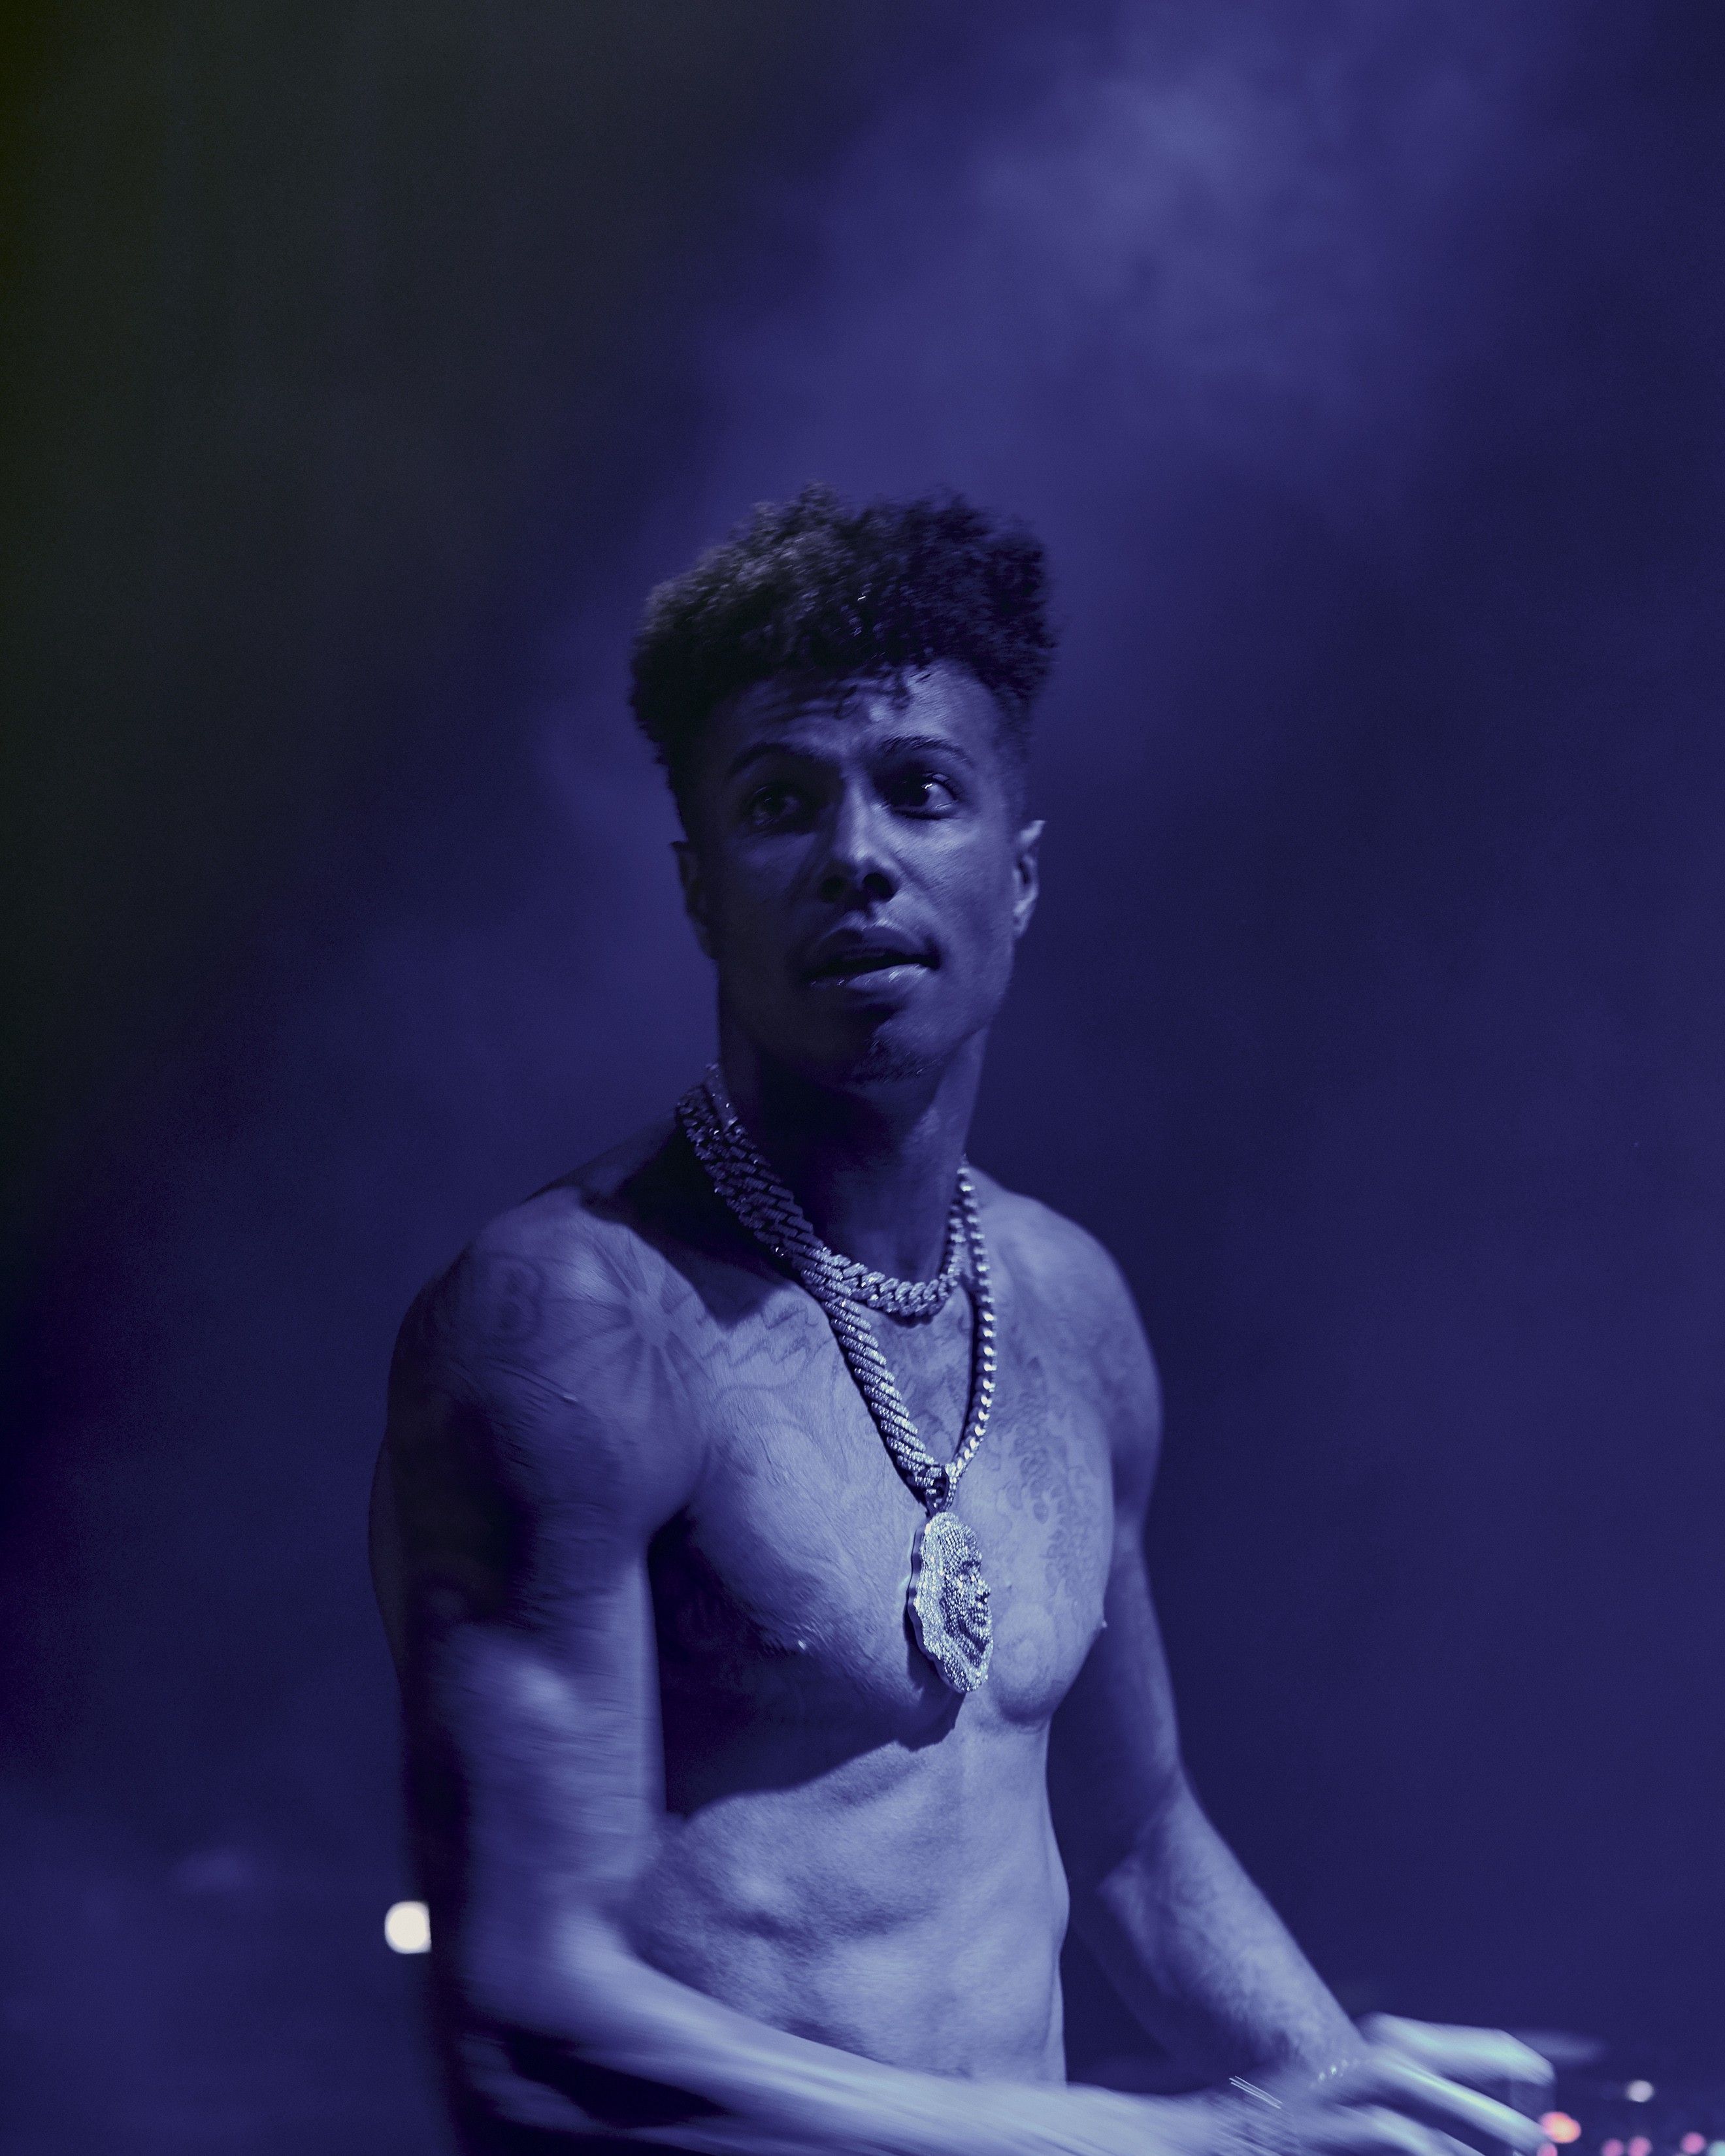 Blueface Rapper Wallpapers posted by Sarah Thompson.